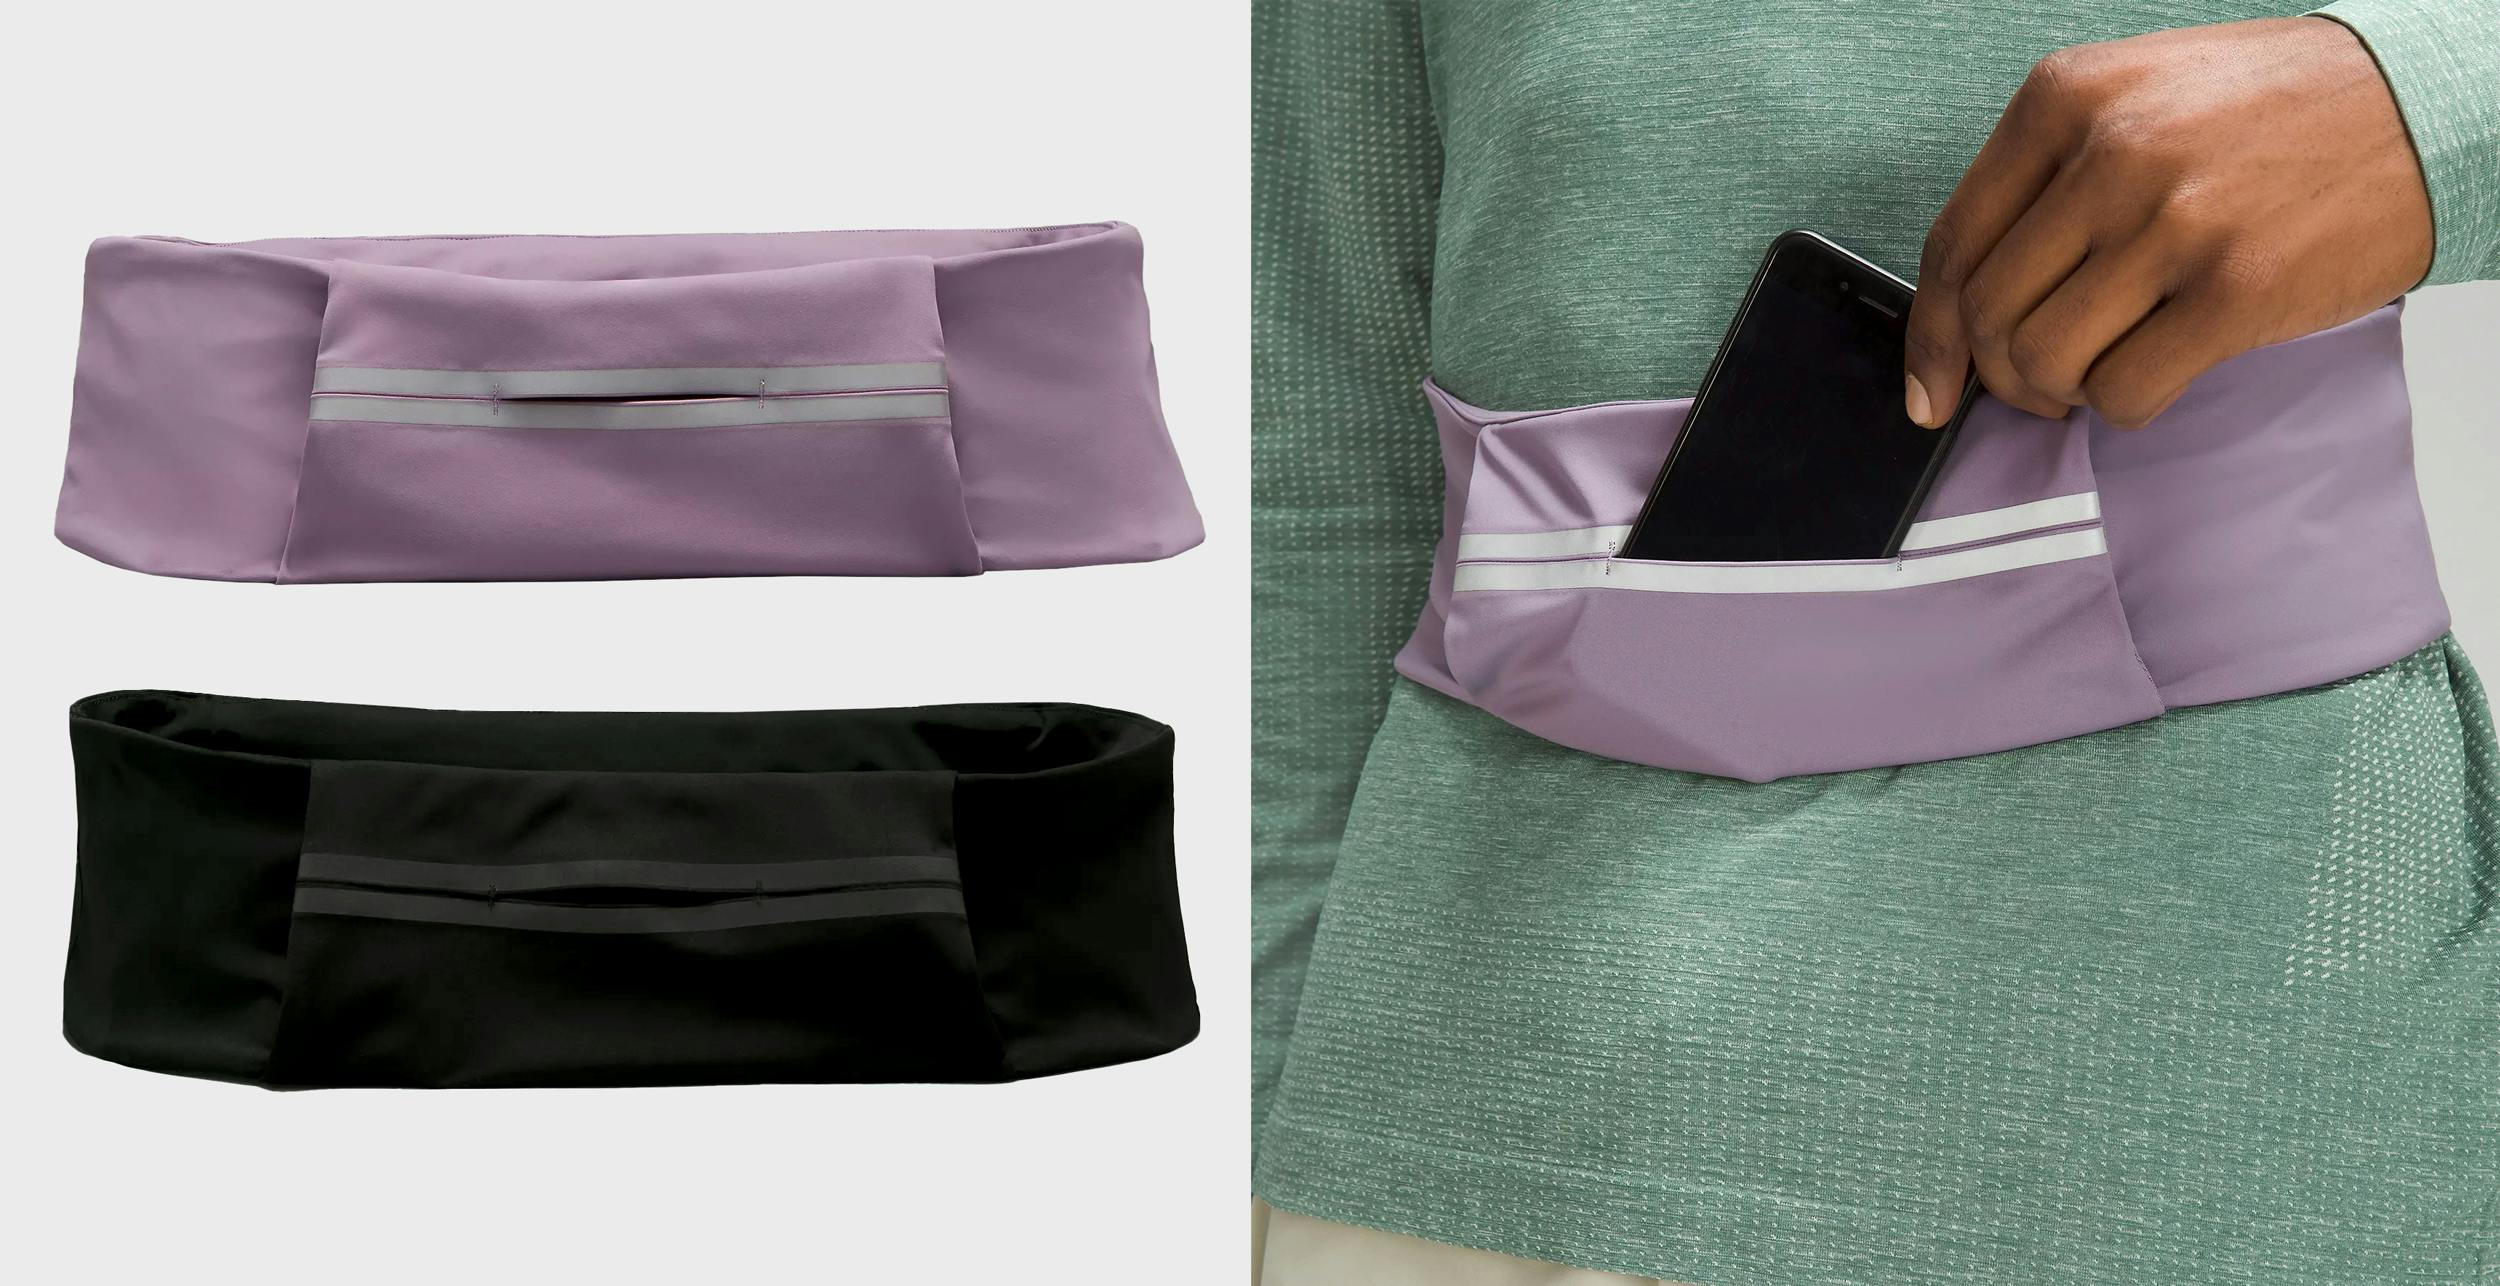 Get the lululemon Everywhere Belt Bag while its back in stock